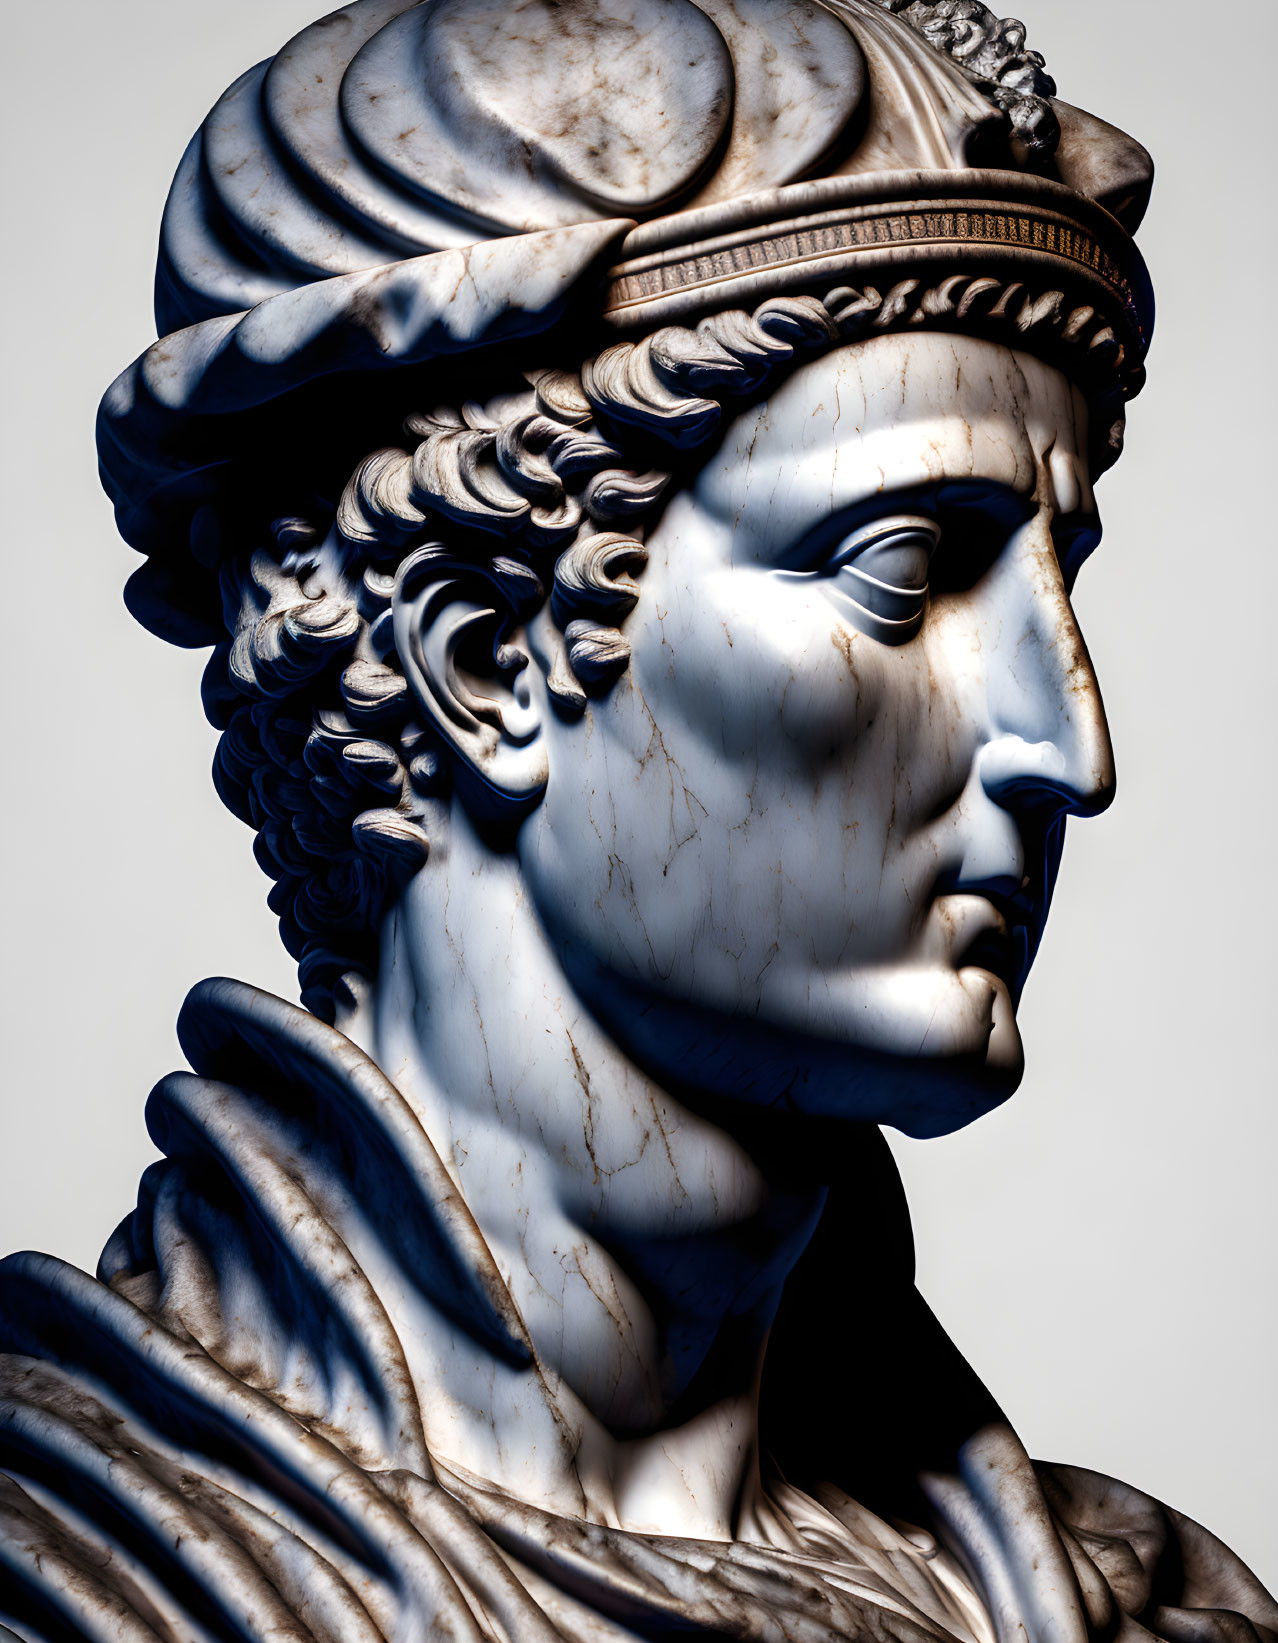 Classical statue profile with wavy hair and laurel wreath on plain background